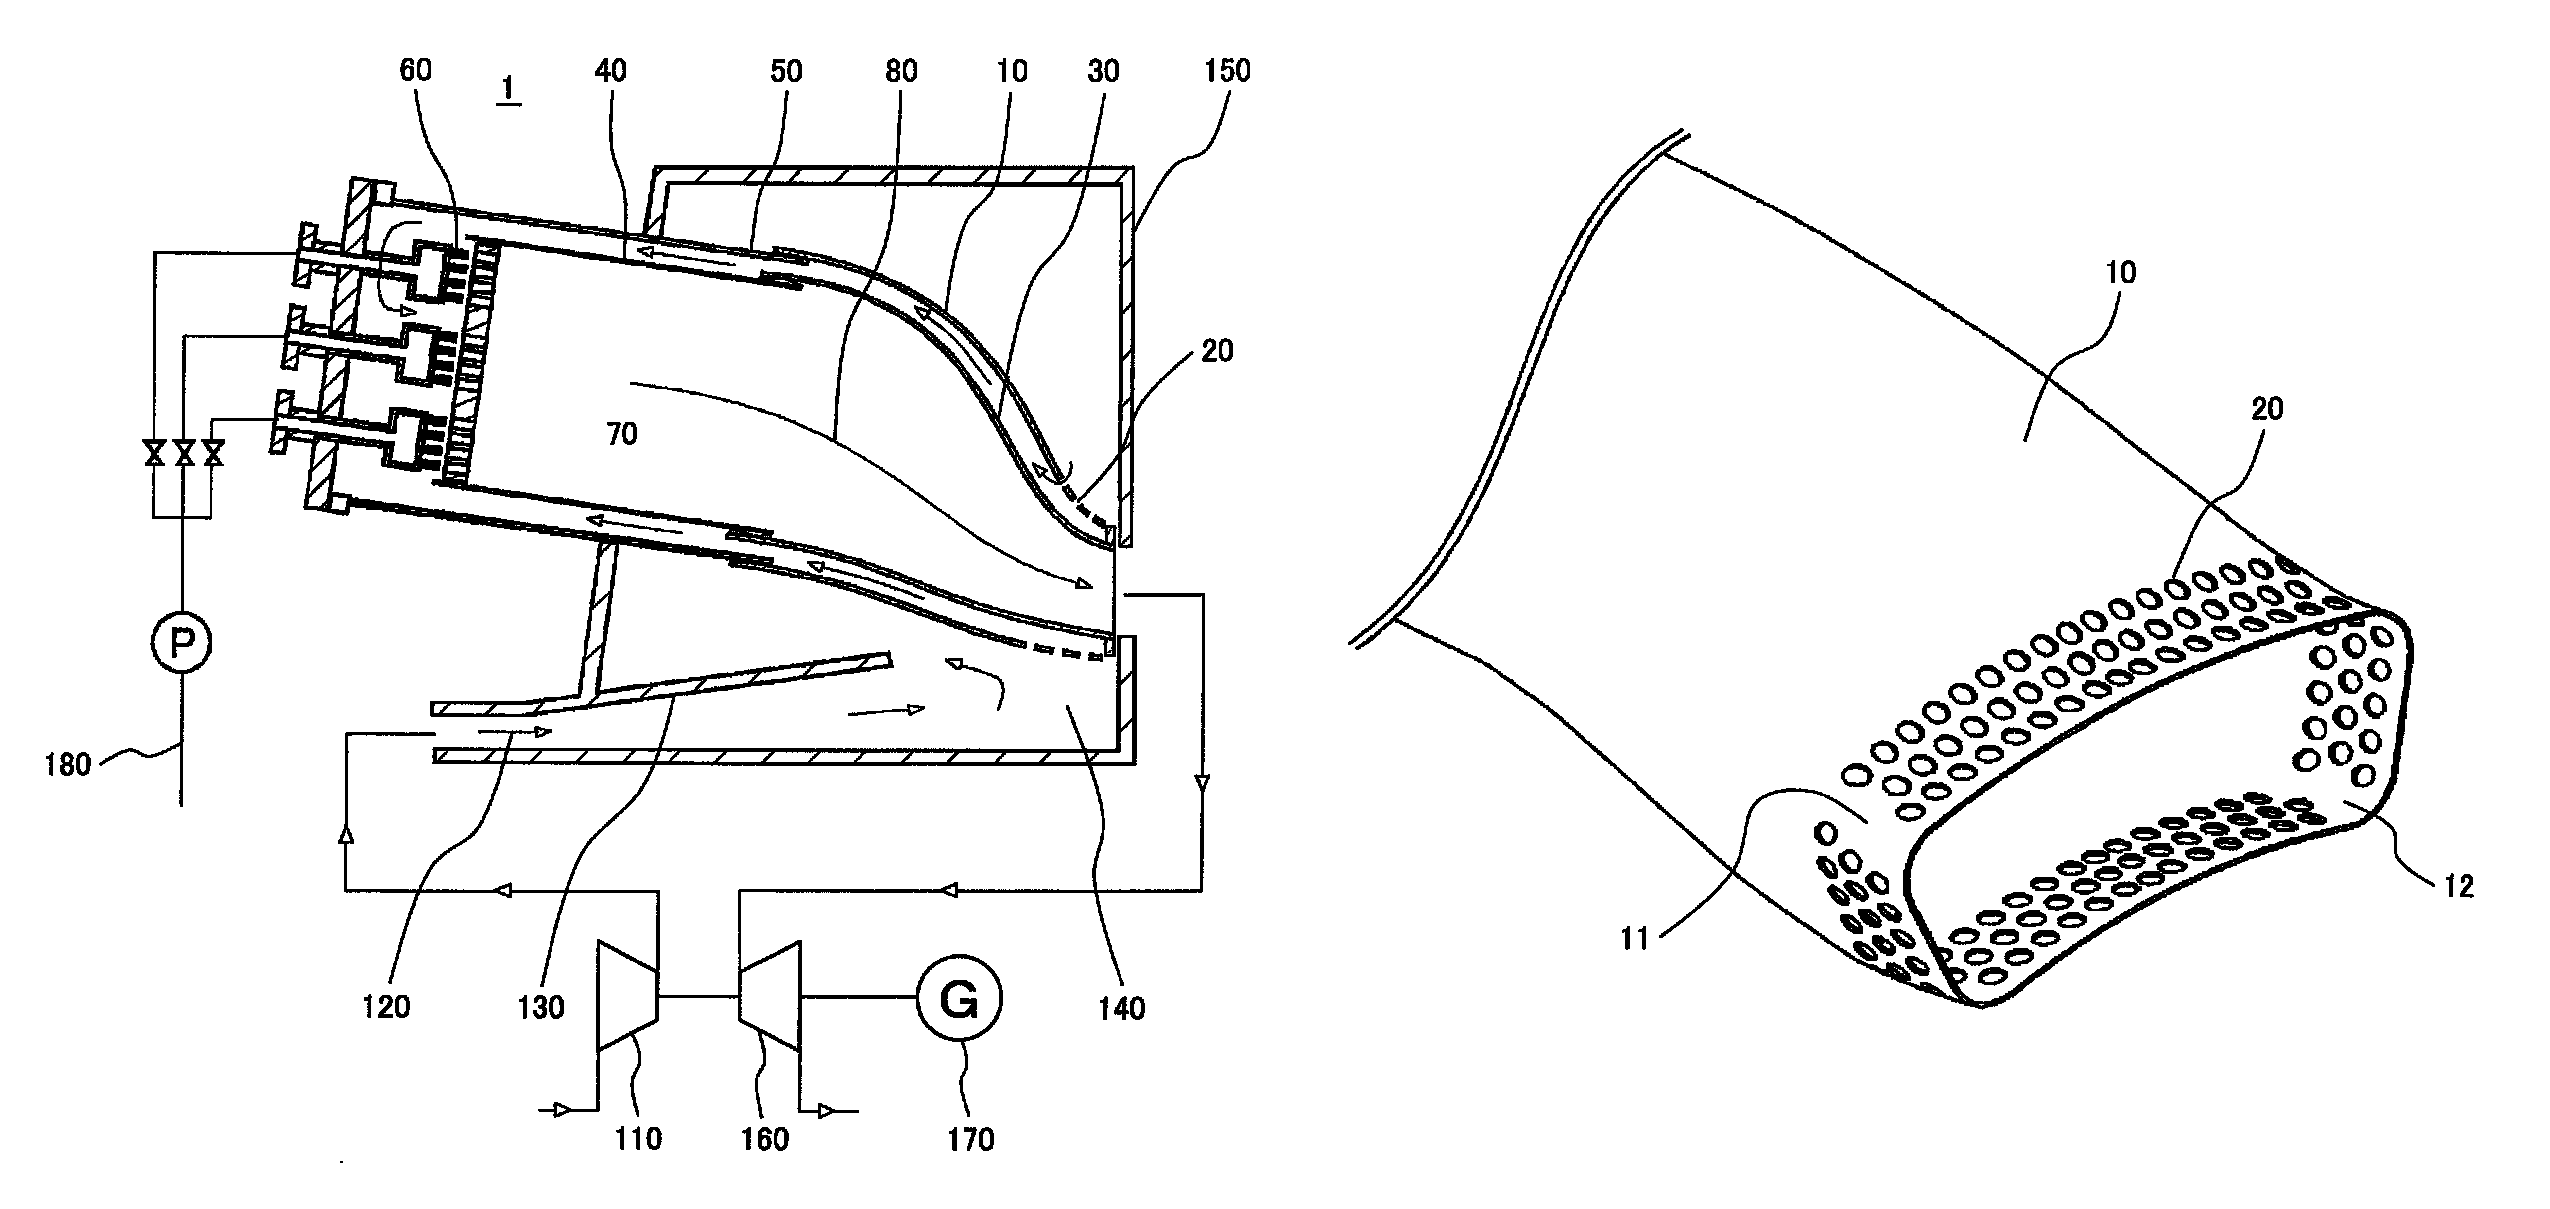 Gas turbine combustor including a transition piece flow sleeve wrapped on an outside surface of a transition piece